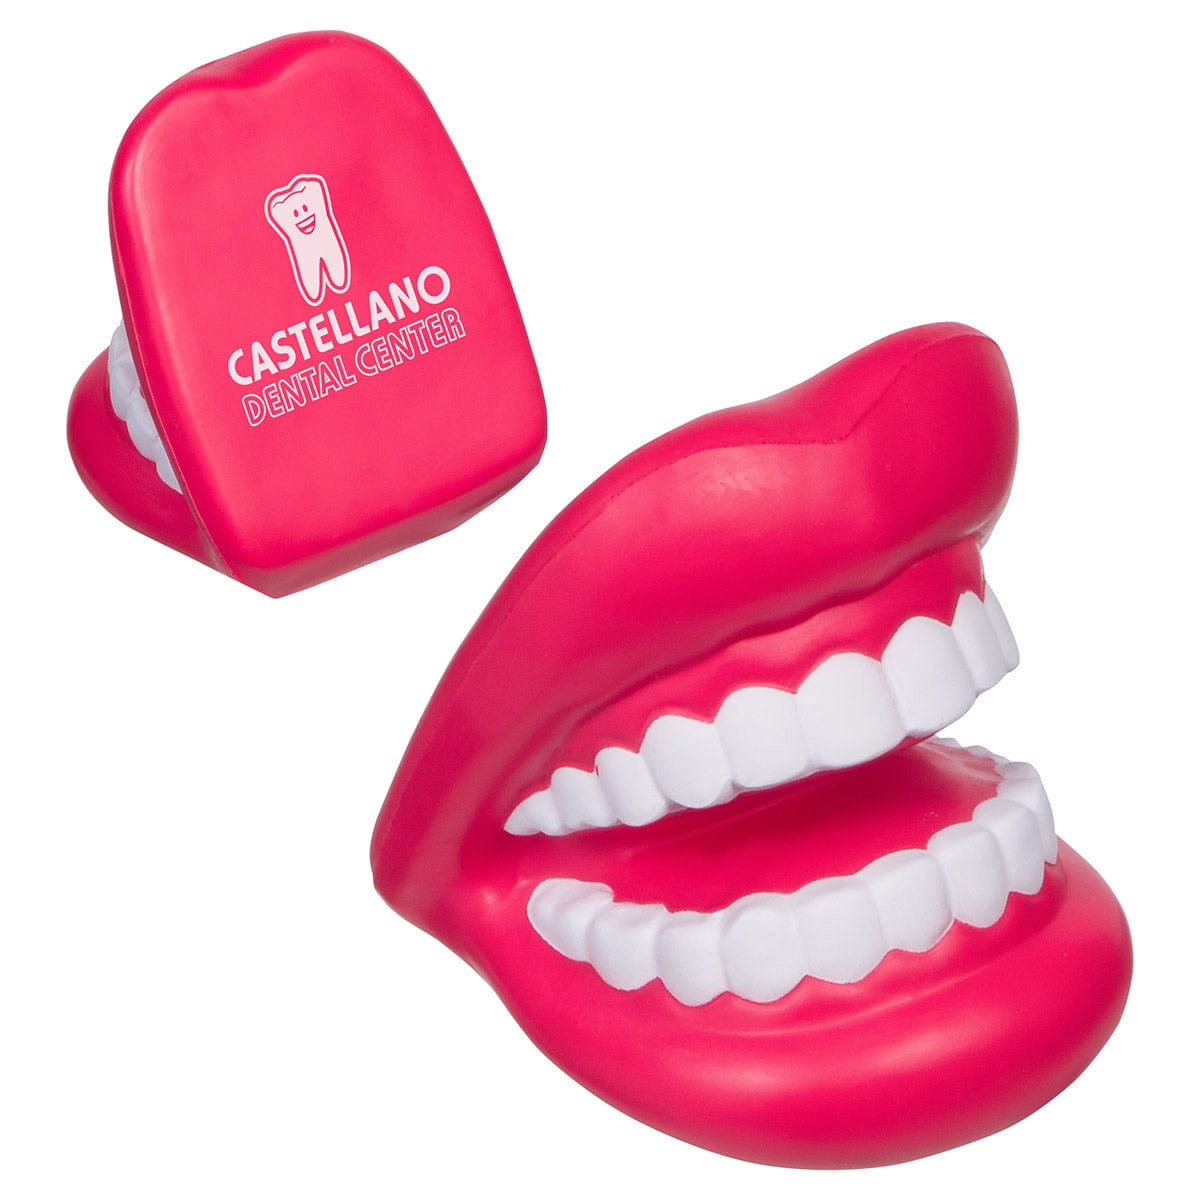 Threadfellows Accessories One Size / Red/White Big Mouth Shaped Stress Reliever